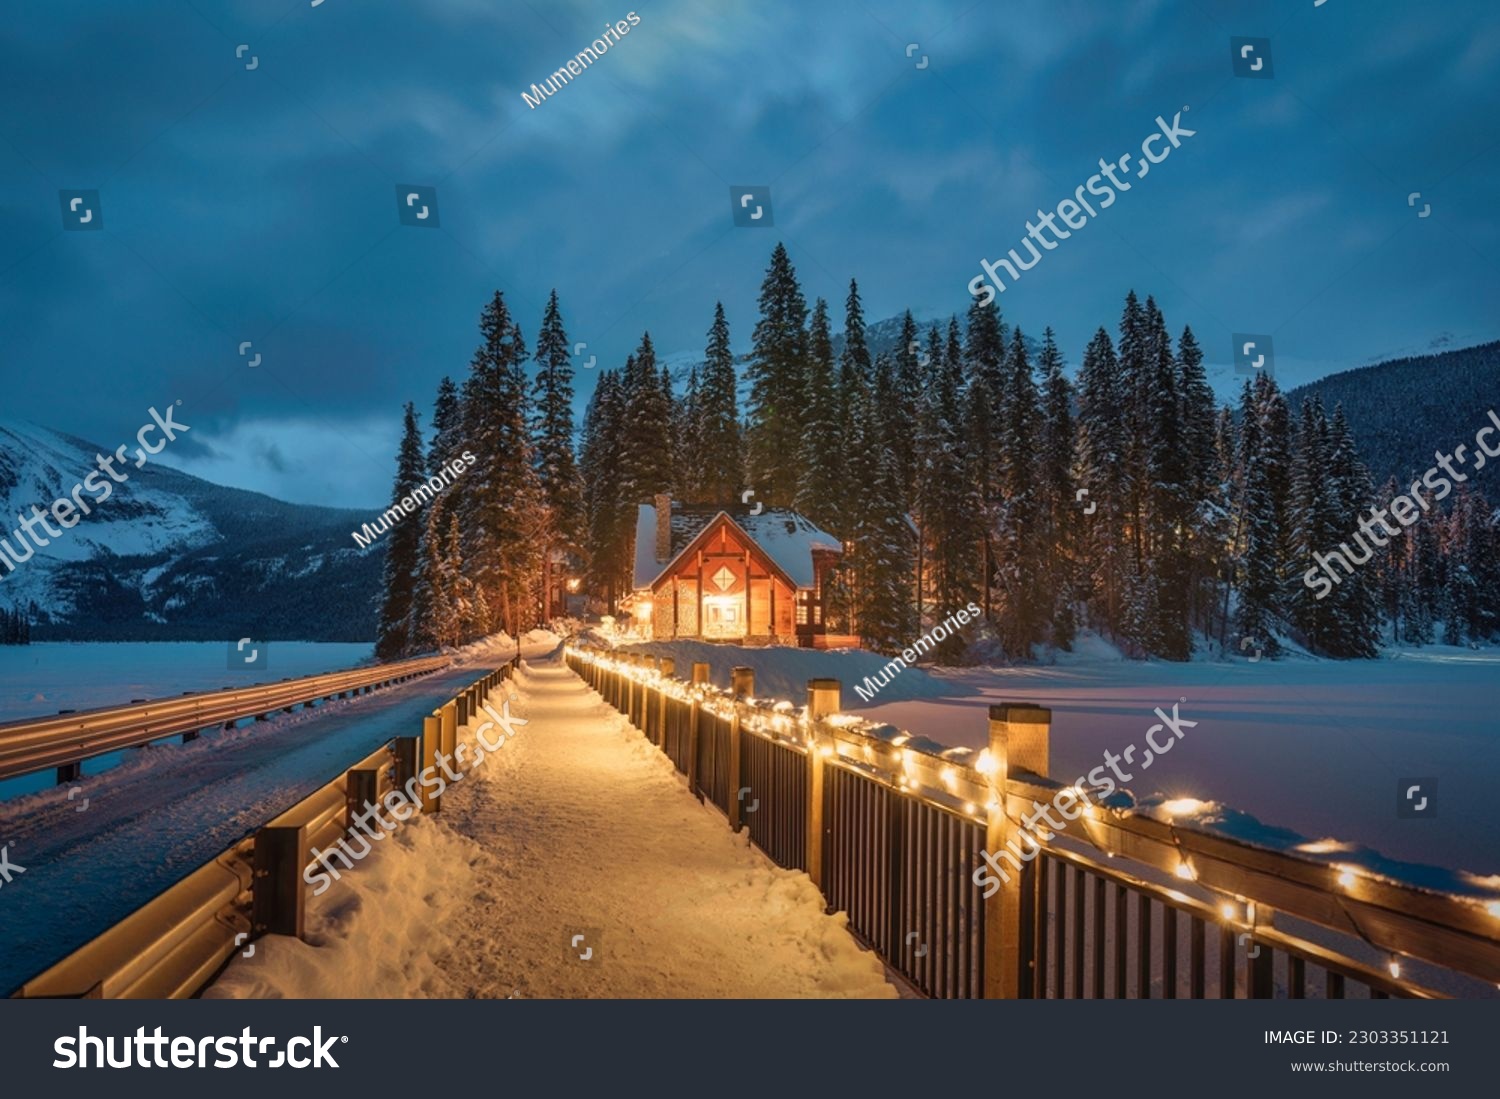 Beautiful view of Emerald Lake with wooden lodge glowing in snowy pine forest on winter at Yoho national park, Alberta, Canada #2303351121